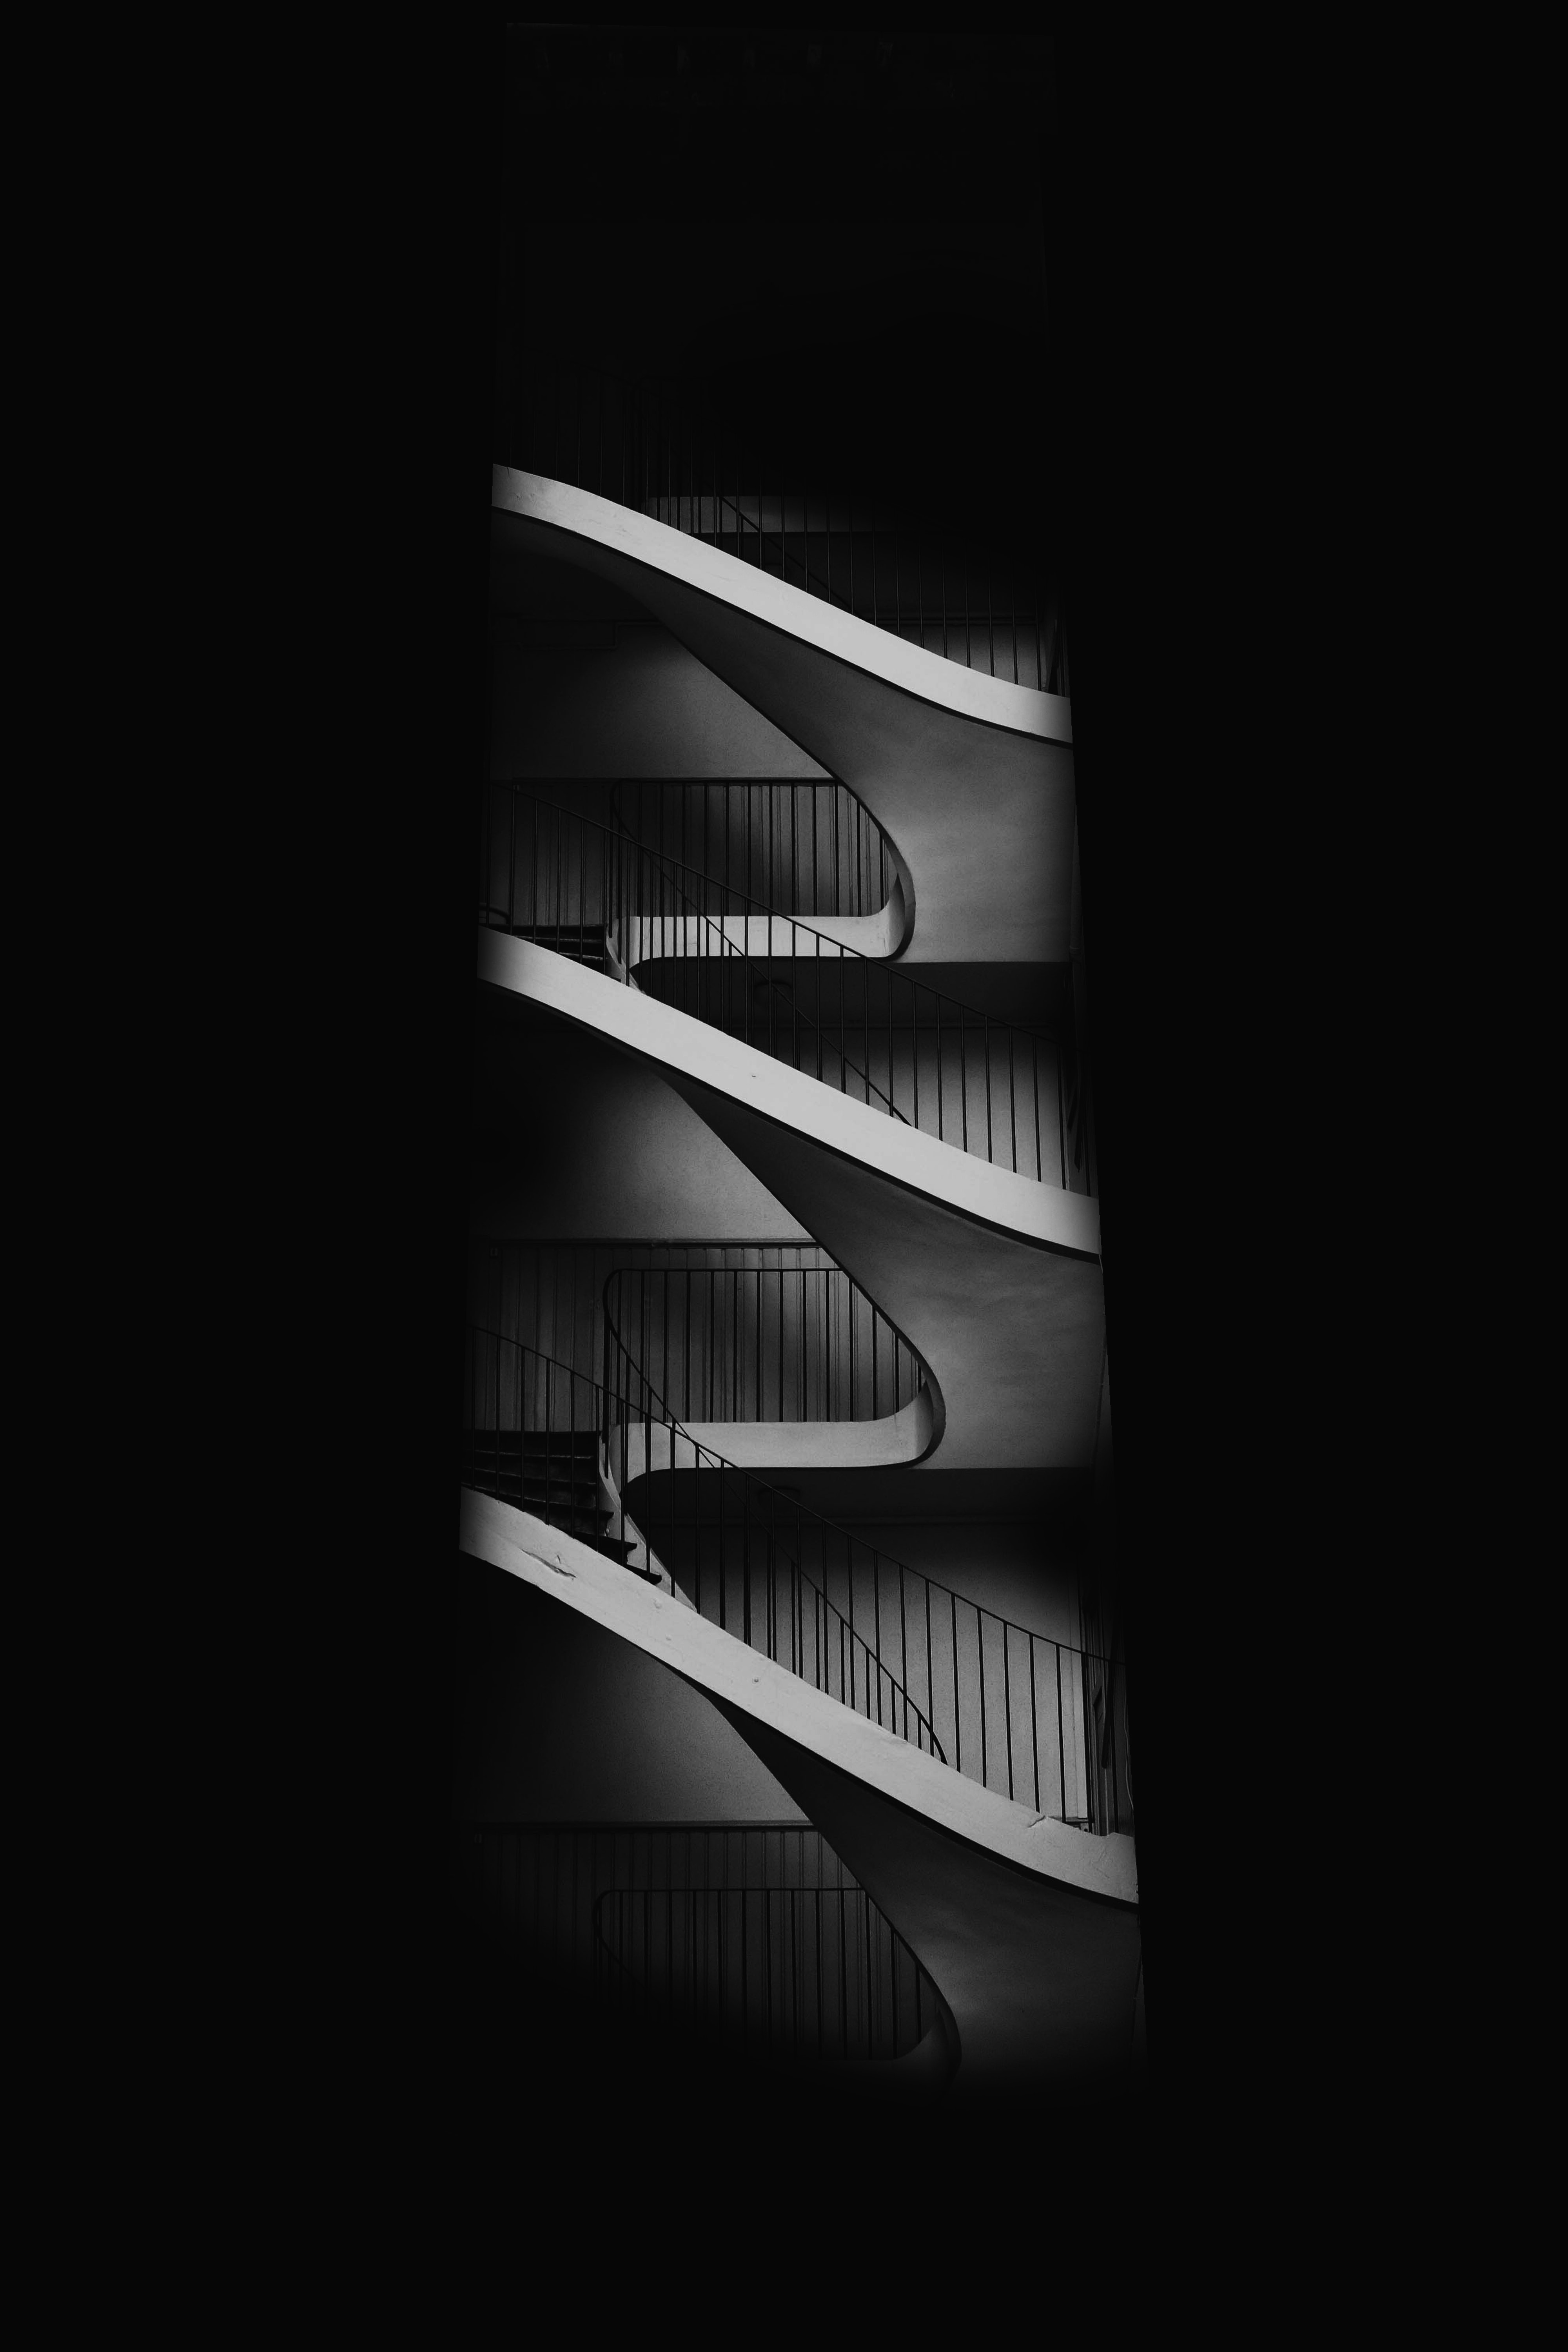 Abstract Black & White Wallpapers